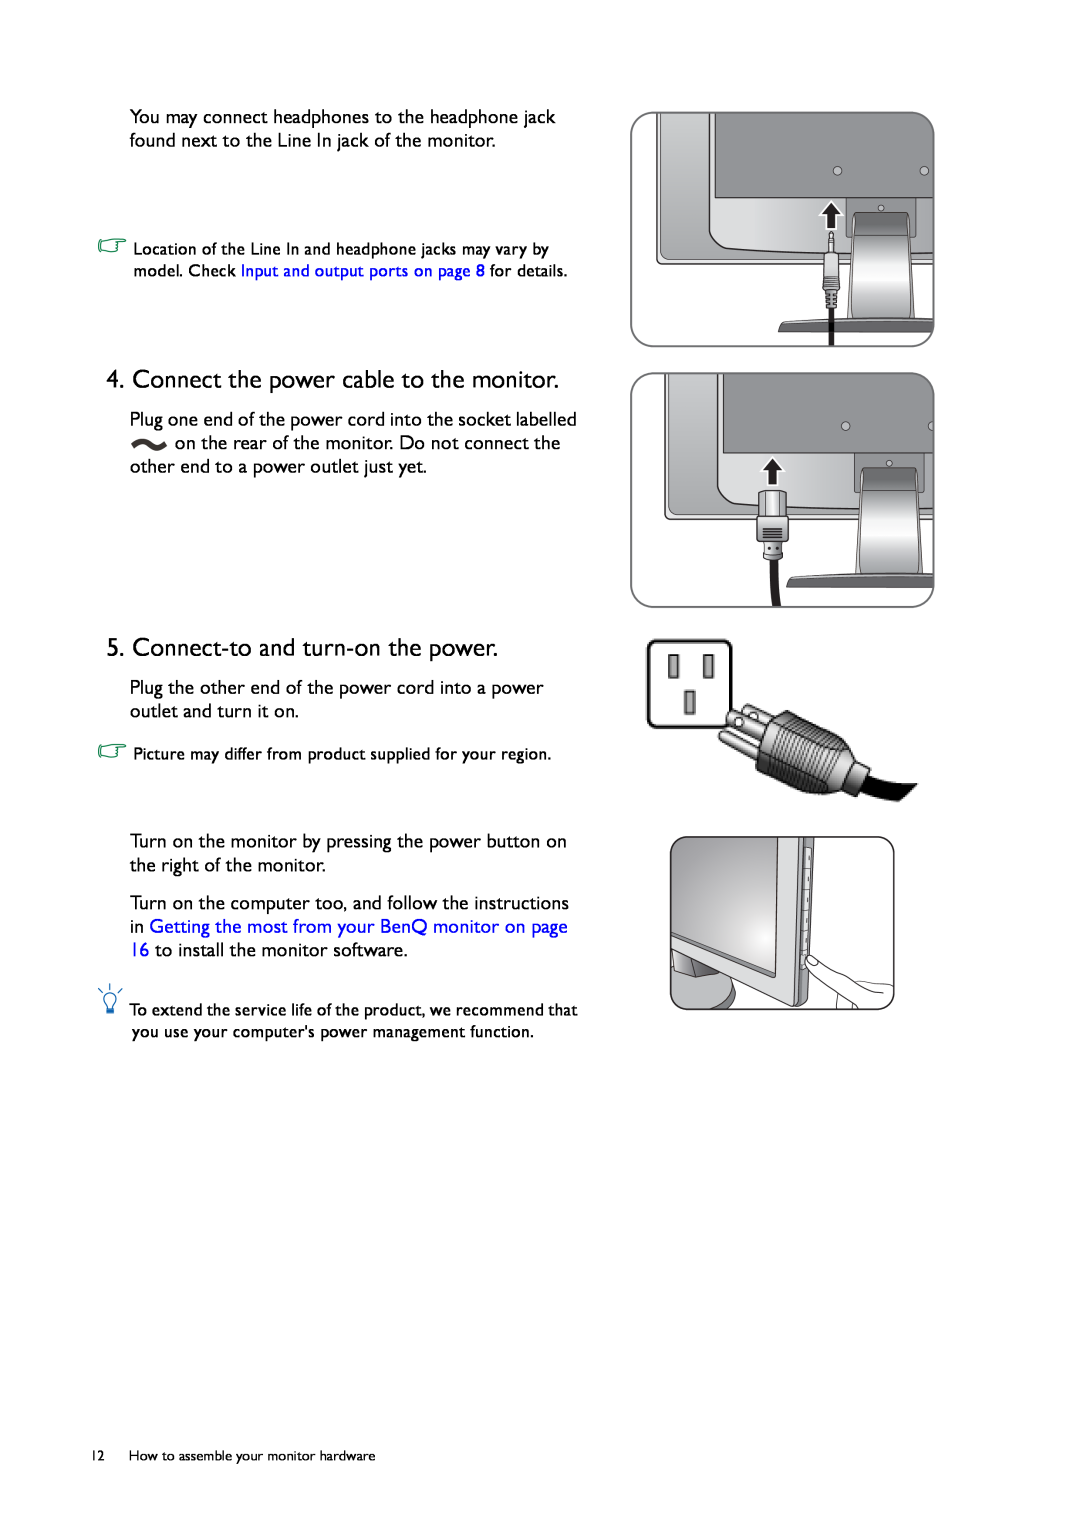 BenQ G50, GL50 user manual Connect the power cable to the monitor, Connect-to and turn-on the power 